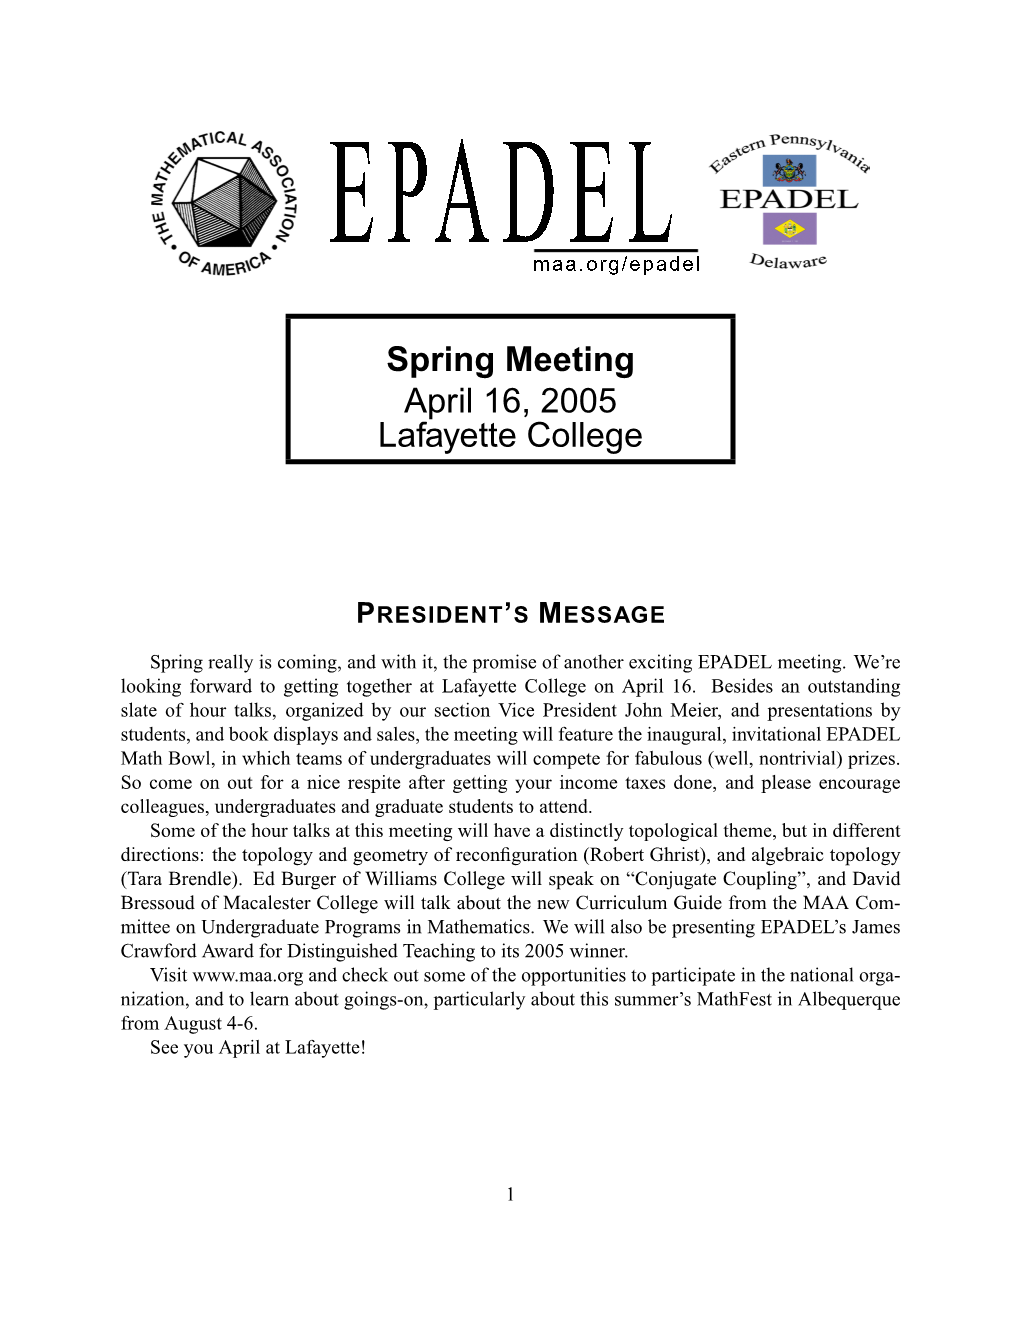 Spring Meeting April 16, 2005 Lafayette College